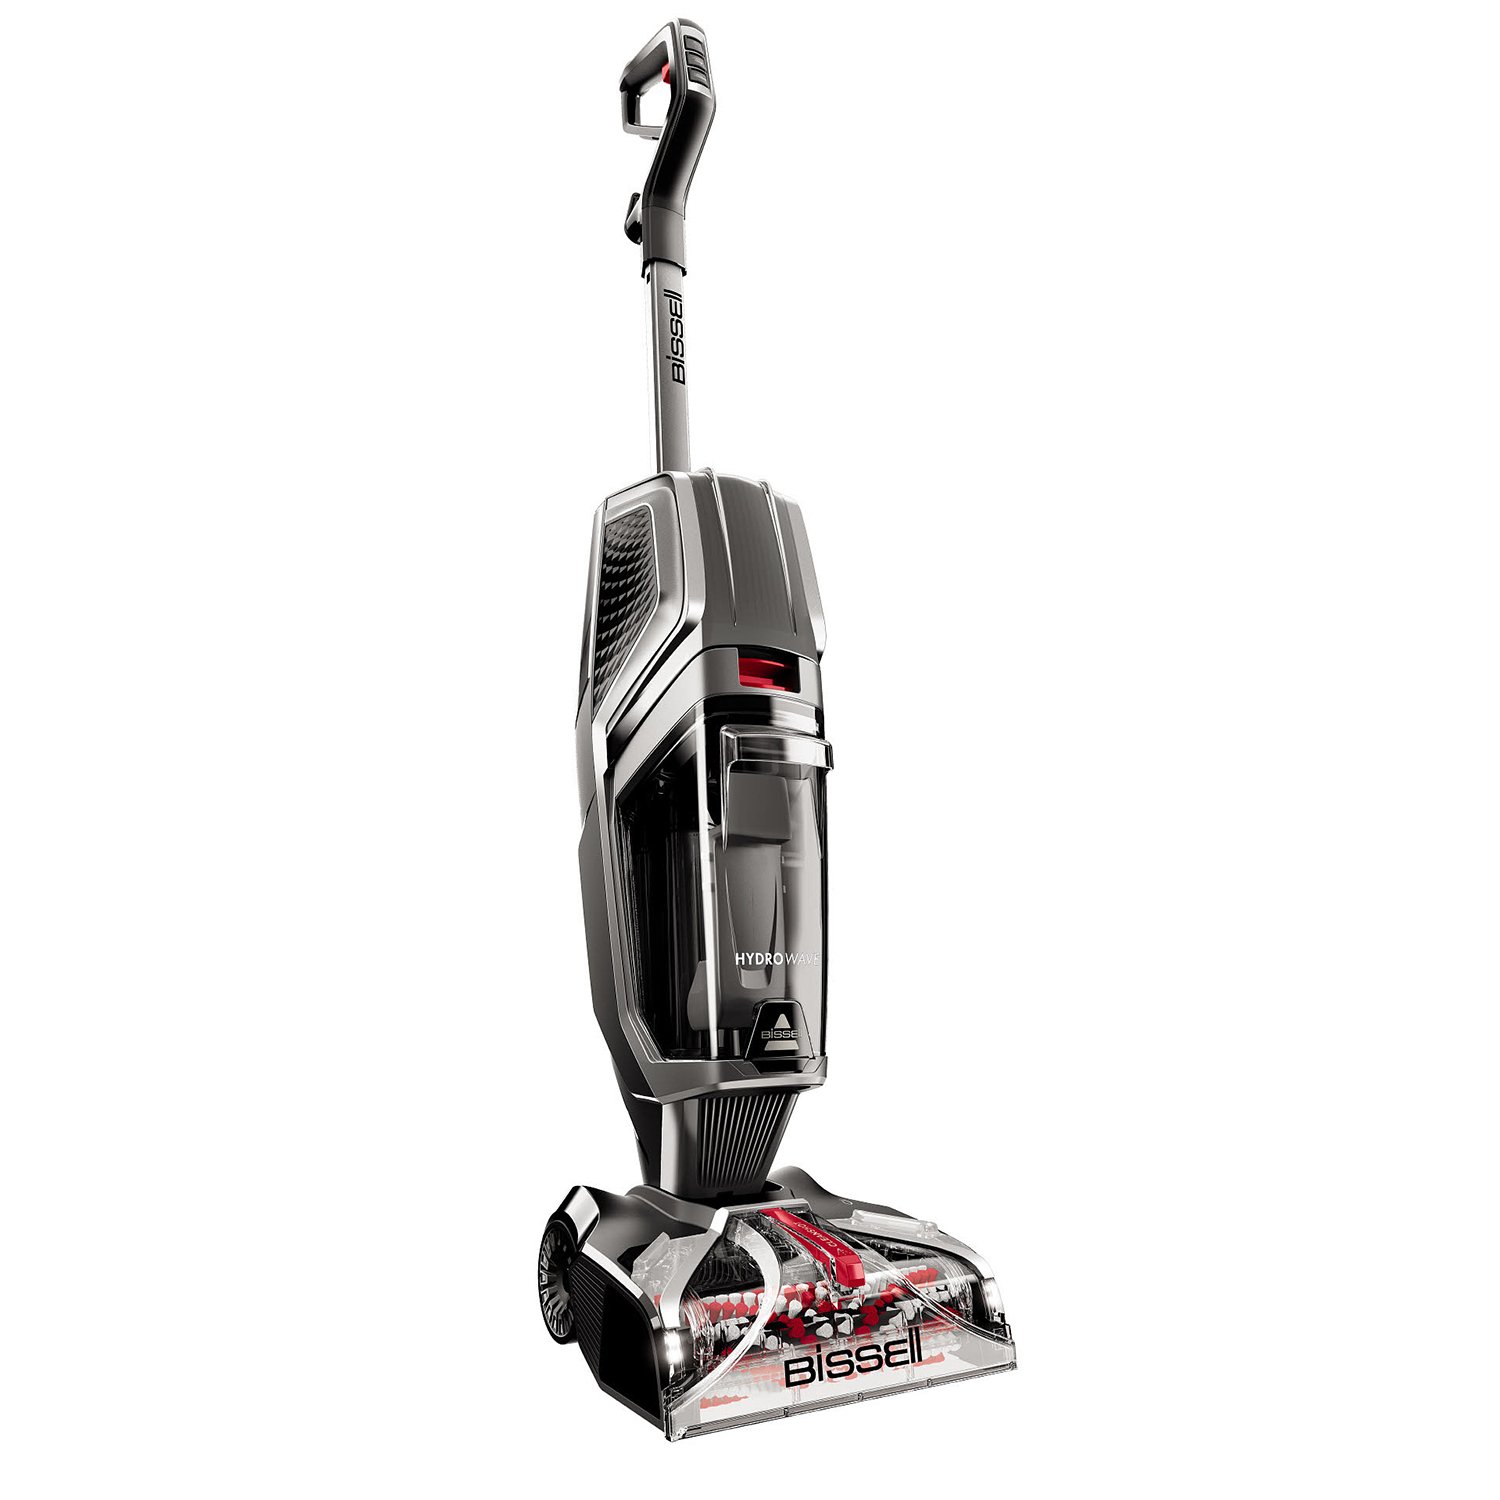 Bissell 2571E HydroWave Compact Carpet Cleaner Review